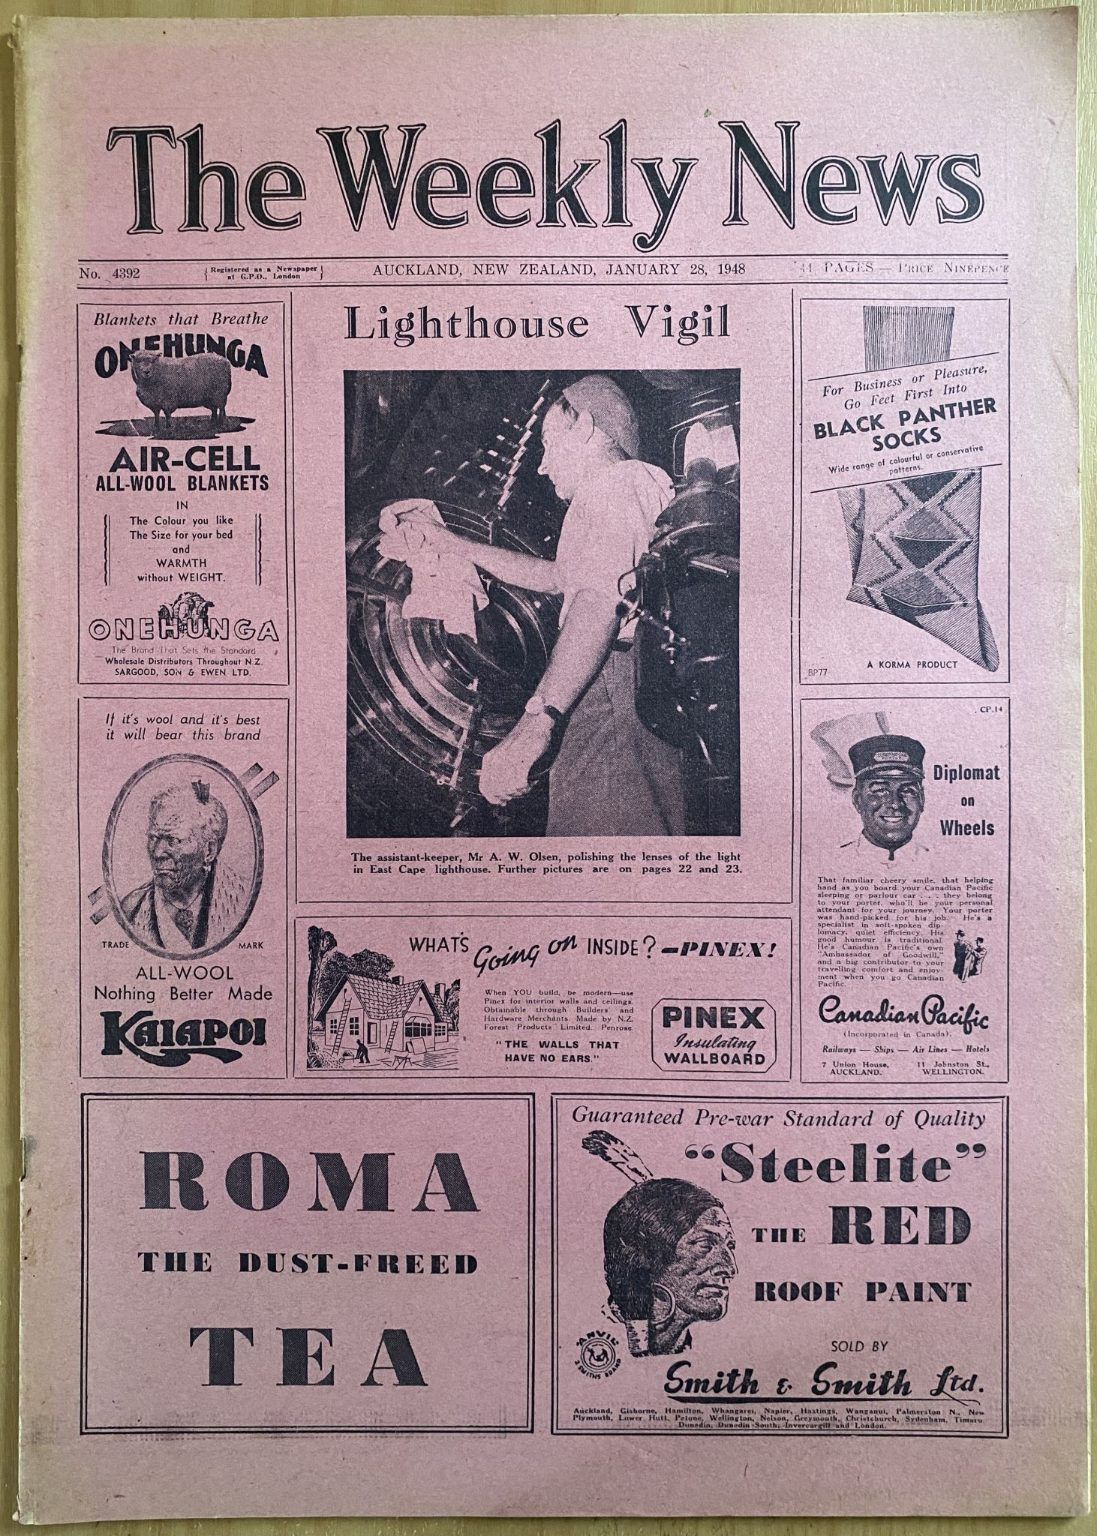 OLD NEWSPAPER: The Weekly News - No. 4392, 28 January 1948